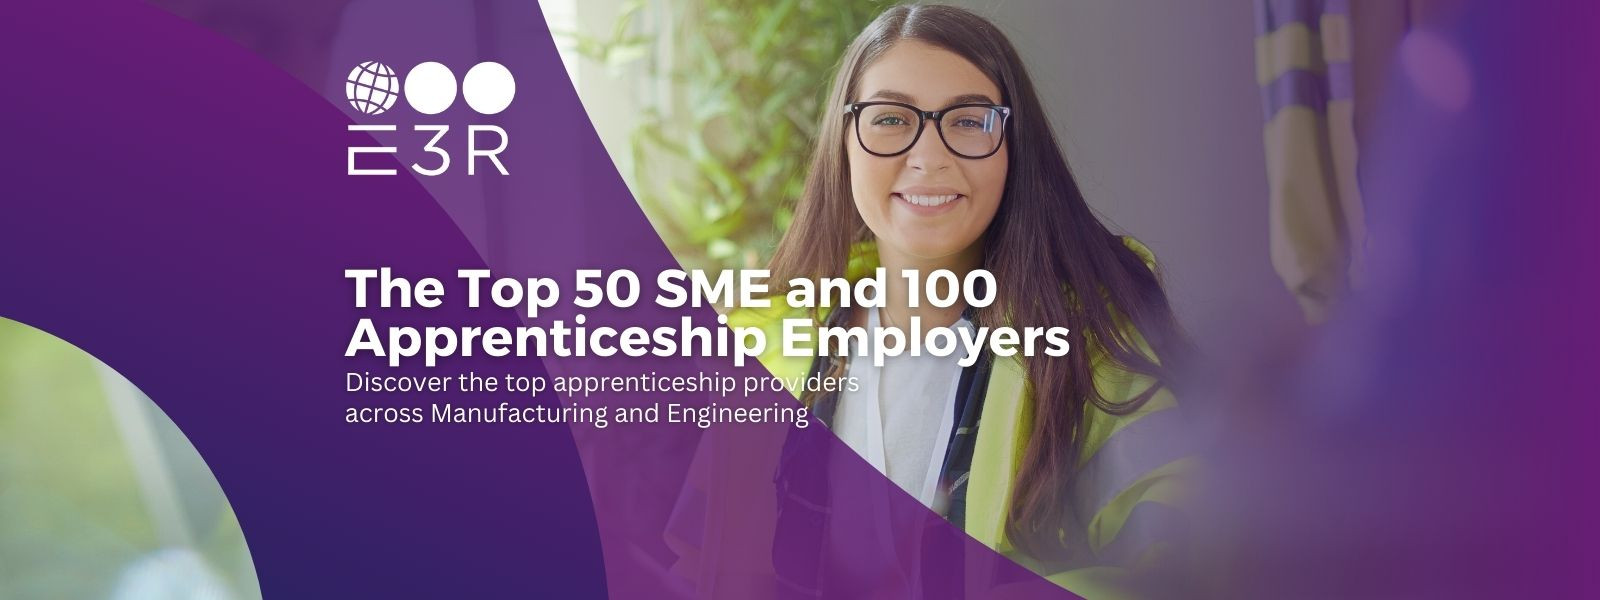 Celebrating the top 50 SME and 100 Manufacturing and Engineering Apprenticeships